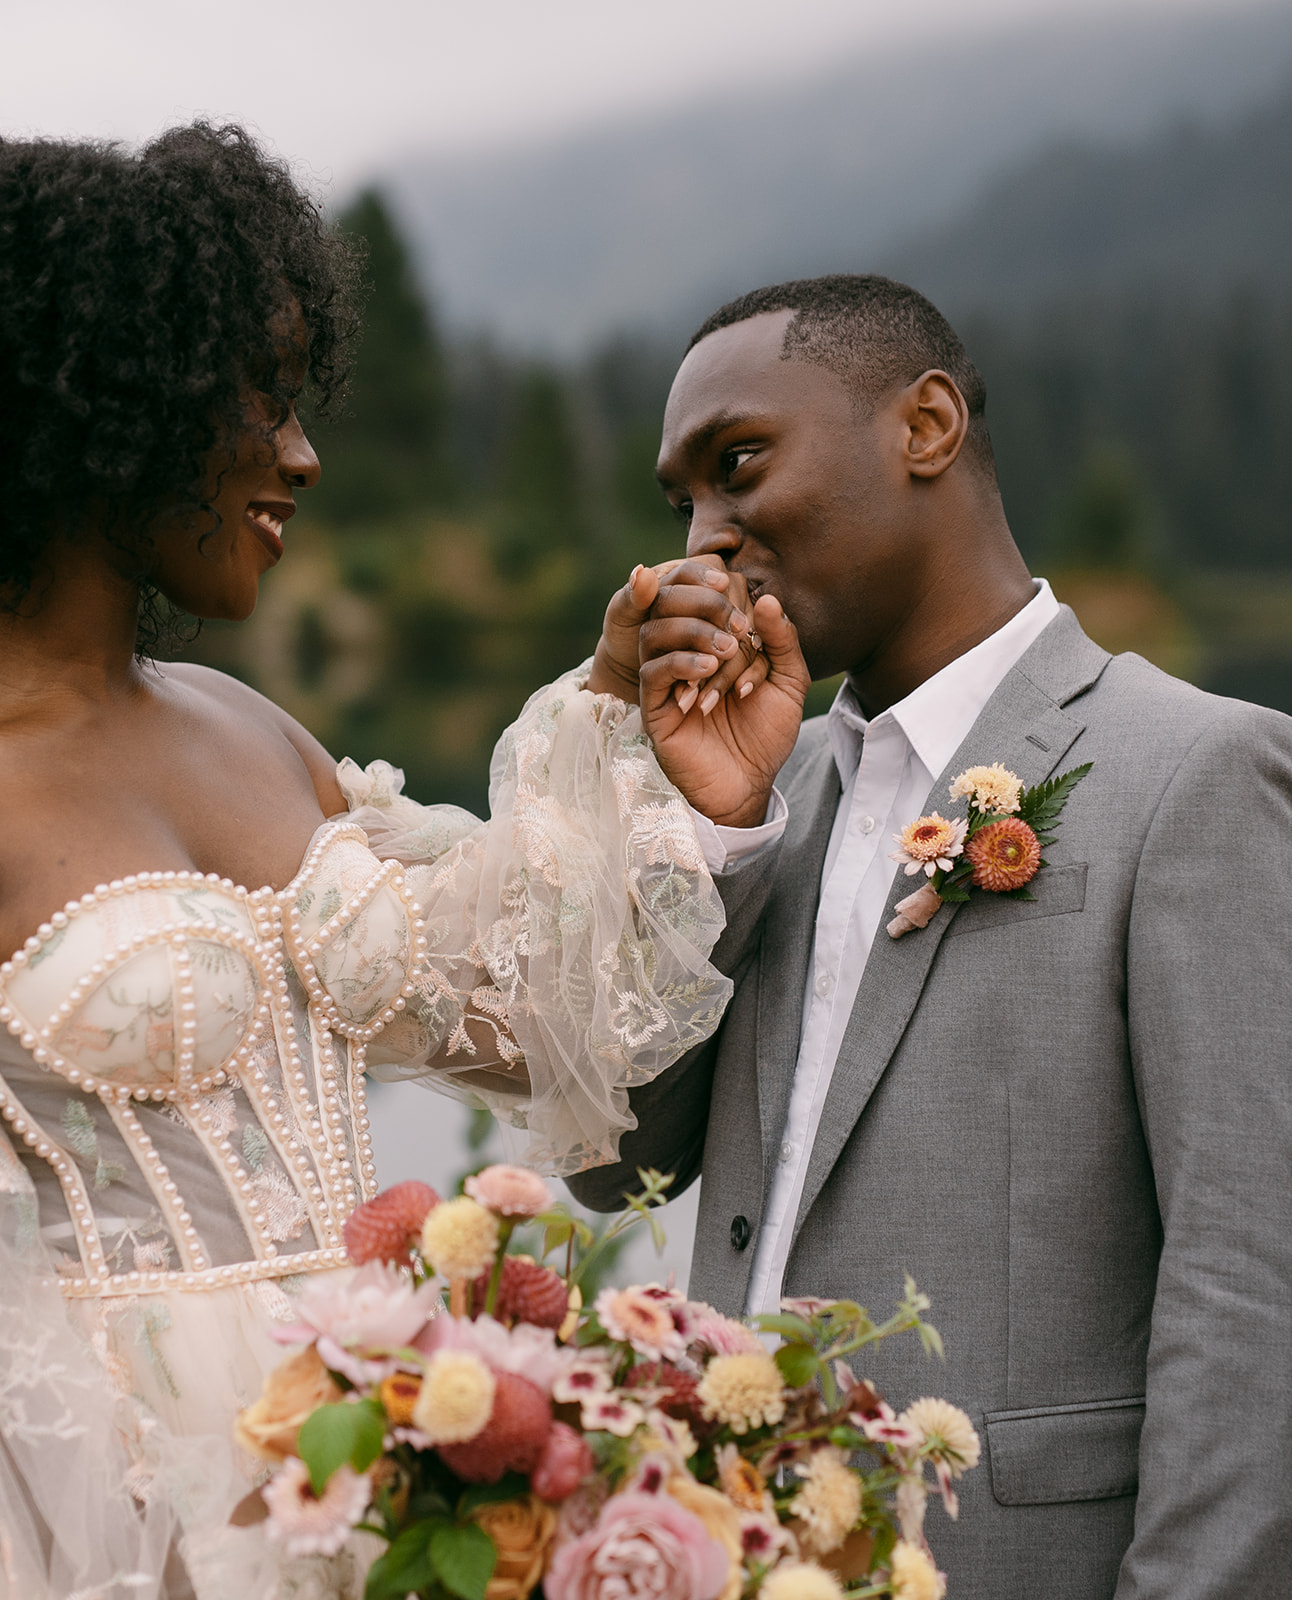 A moody and earthy elopement in the Snoqualmie National Forest Washington